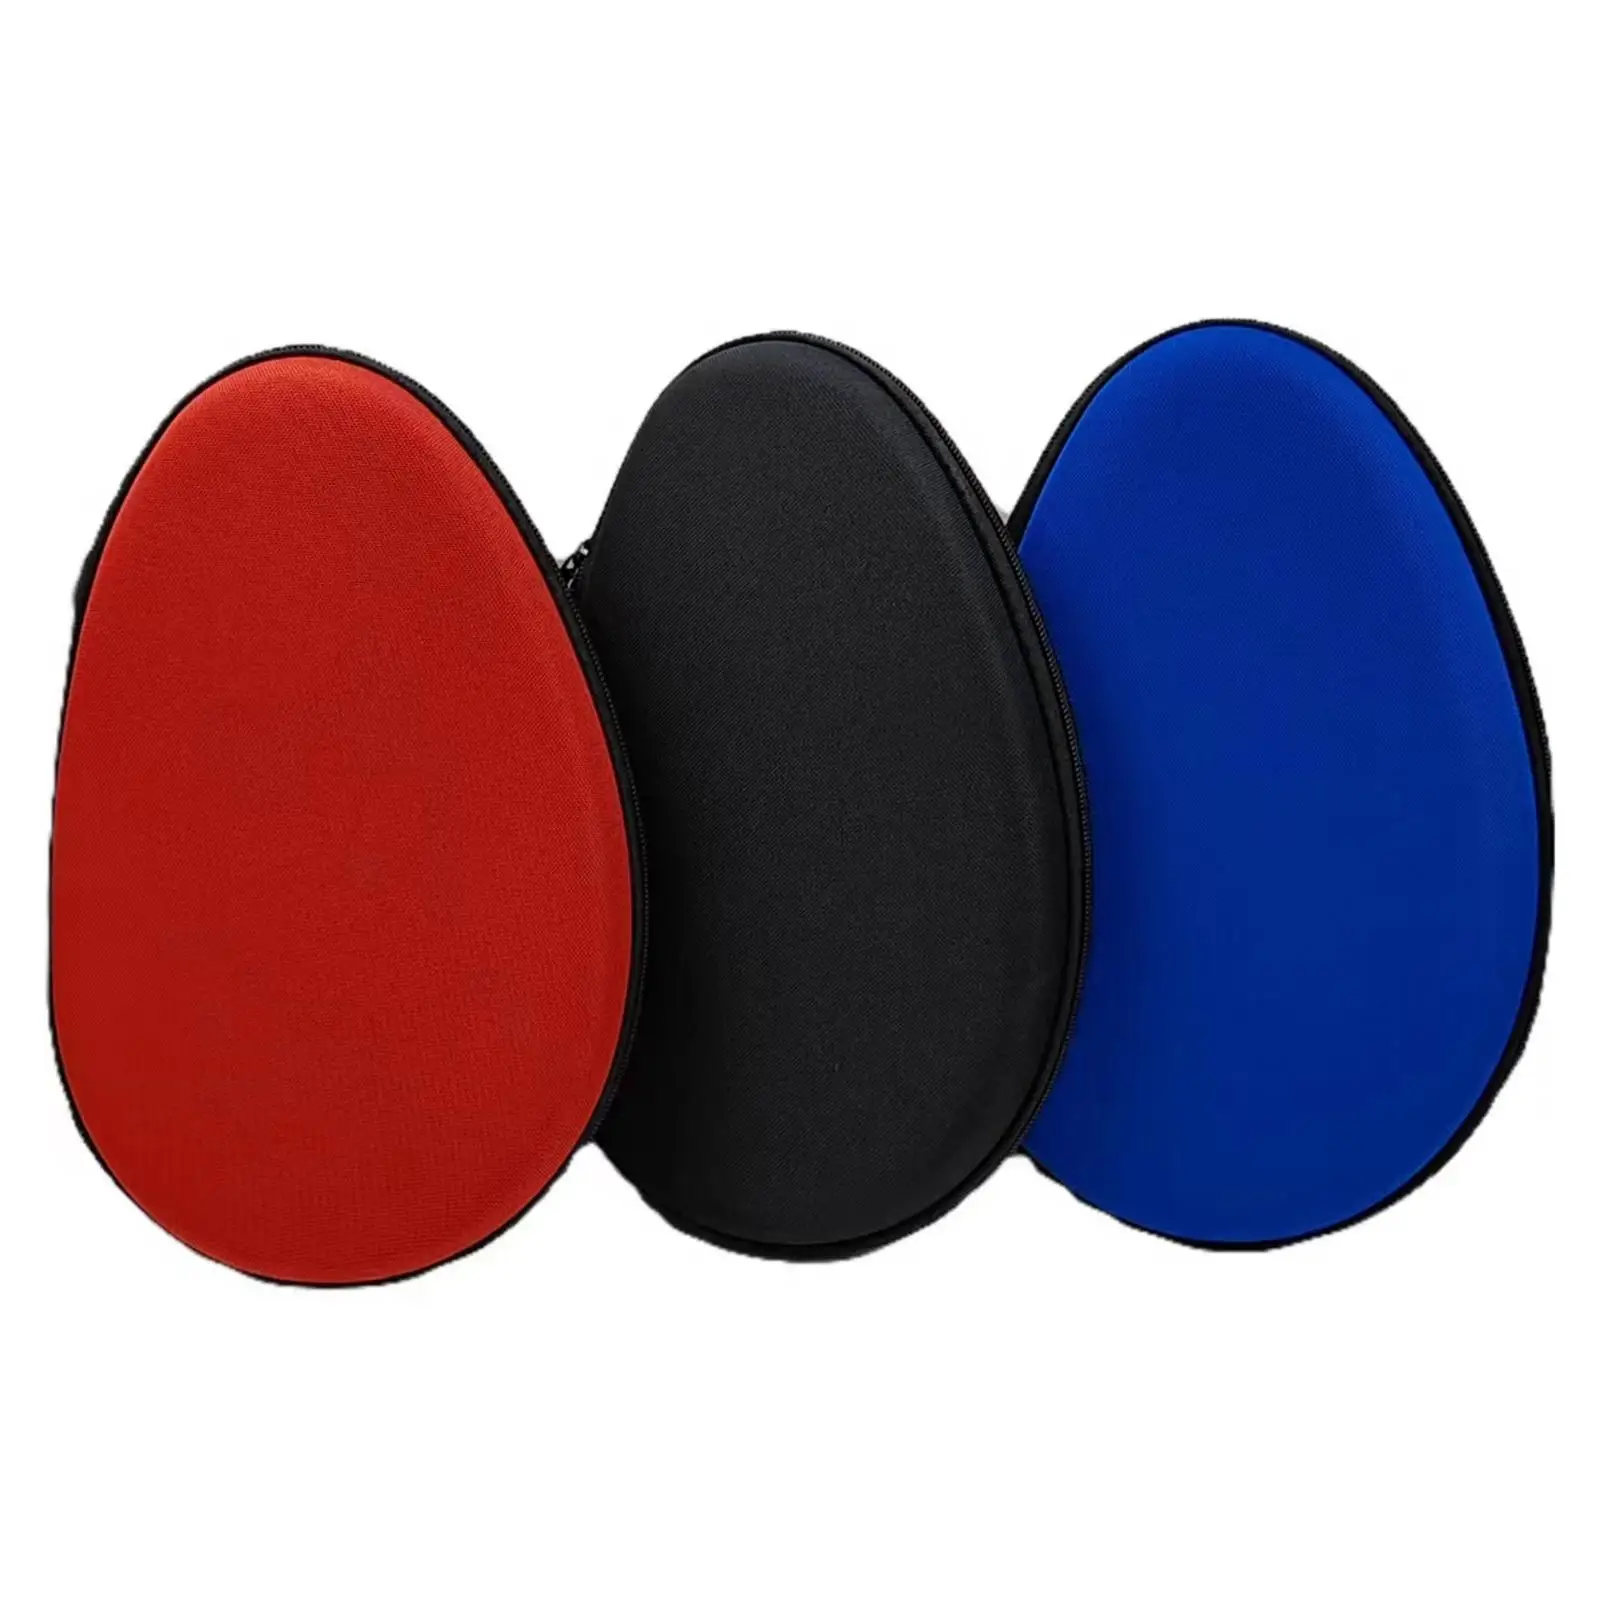 Multifunction Table Tennis Racket Case Reusable Wear Resistant Ping Pong Paddle Pocket Table Tennis Protector for Competition